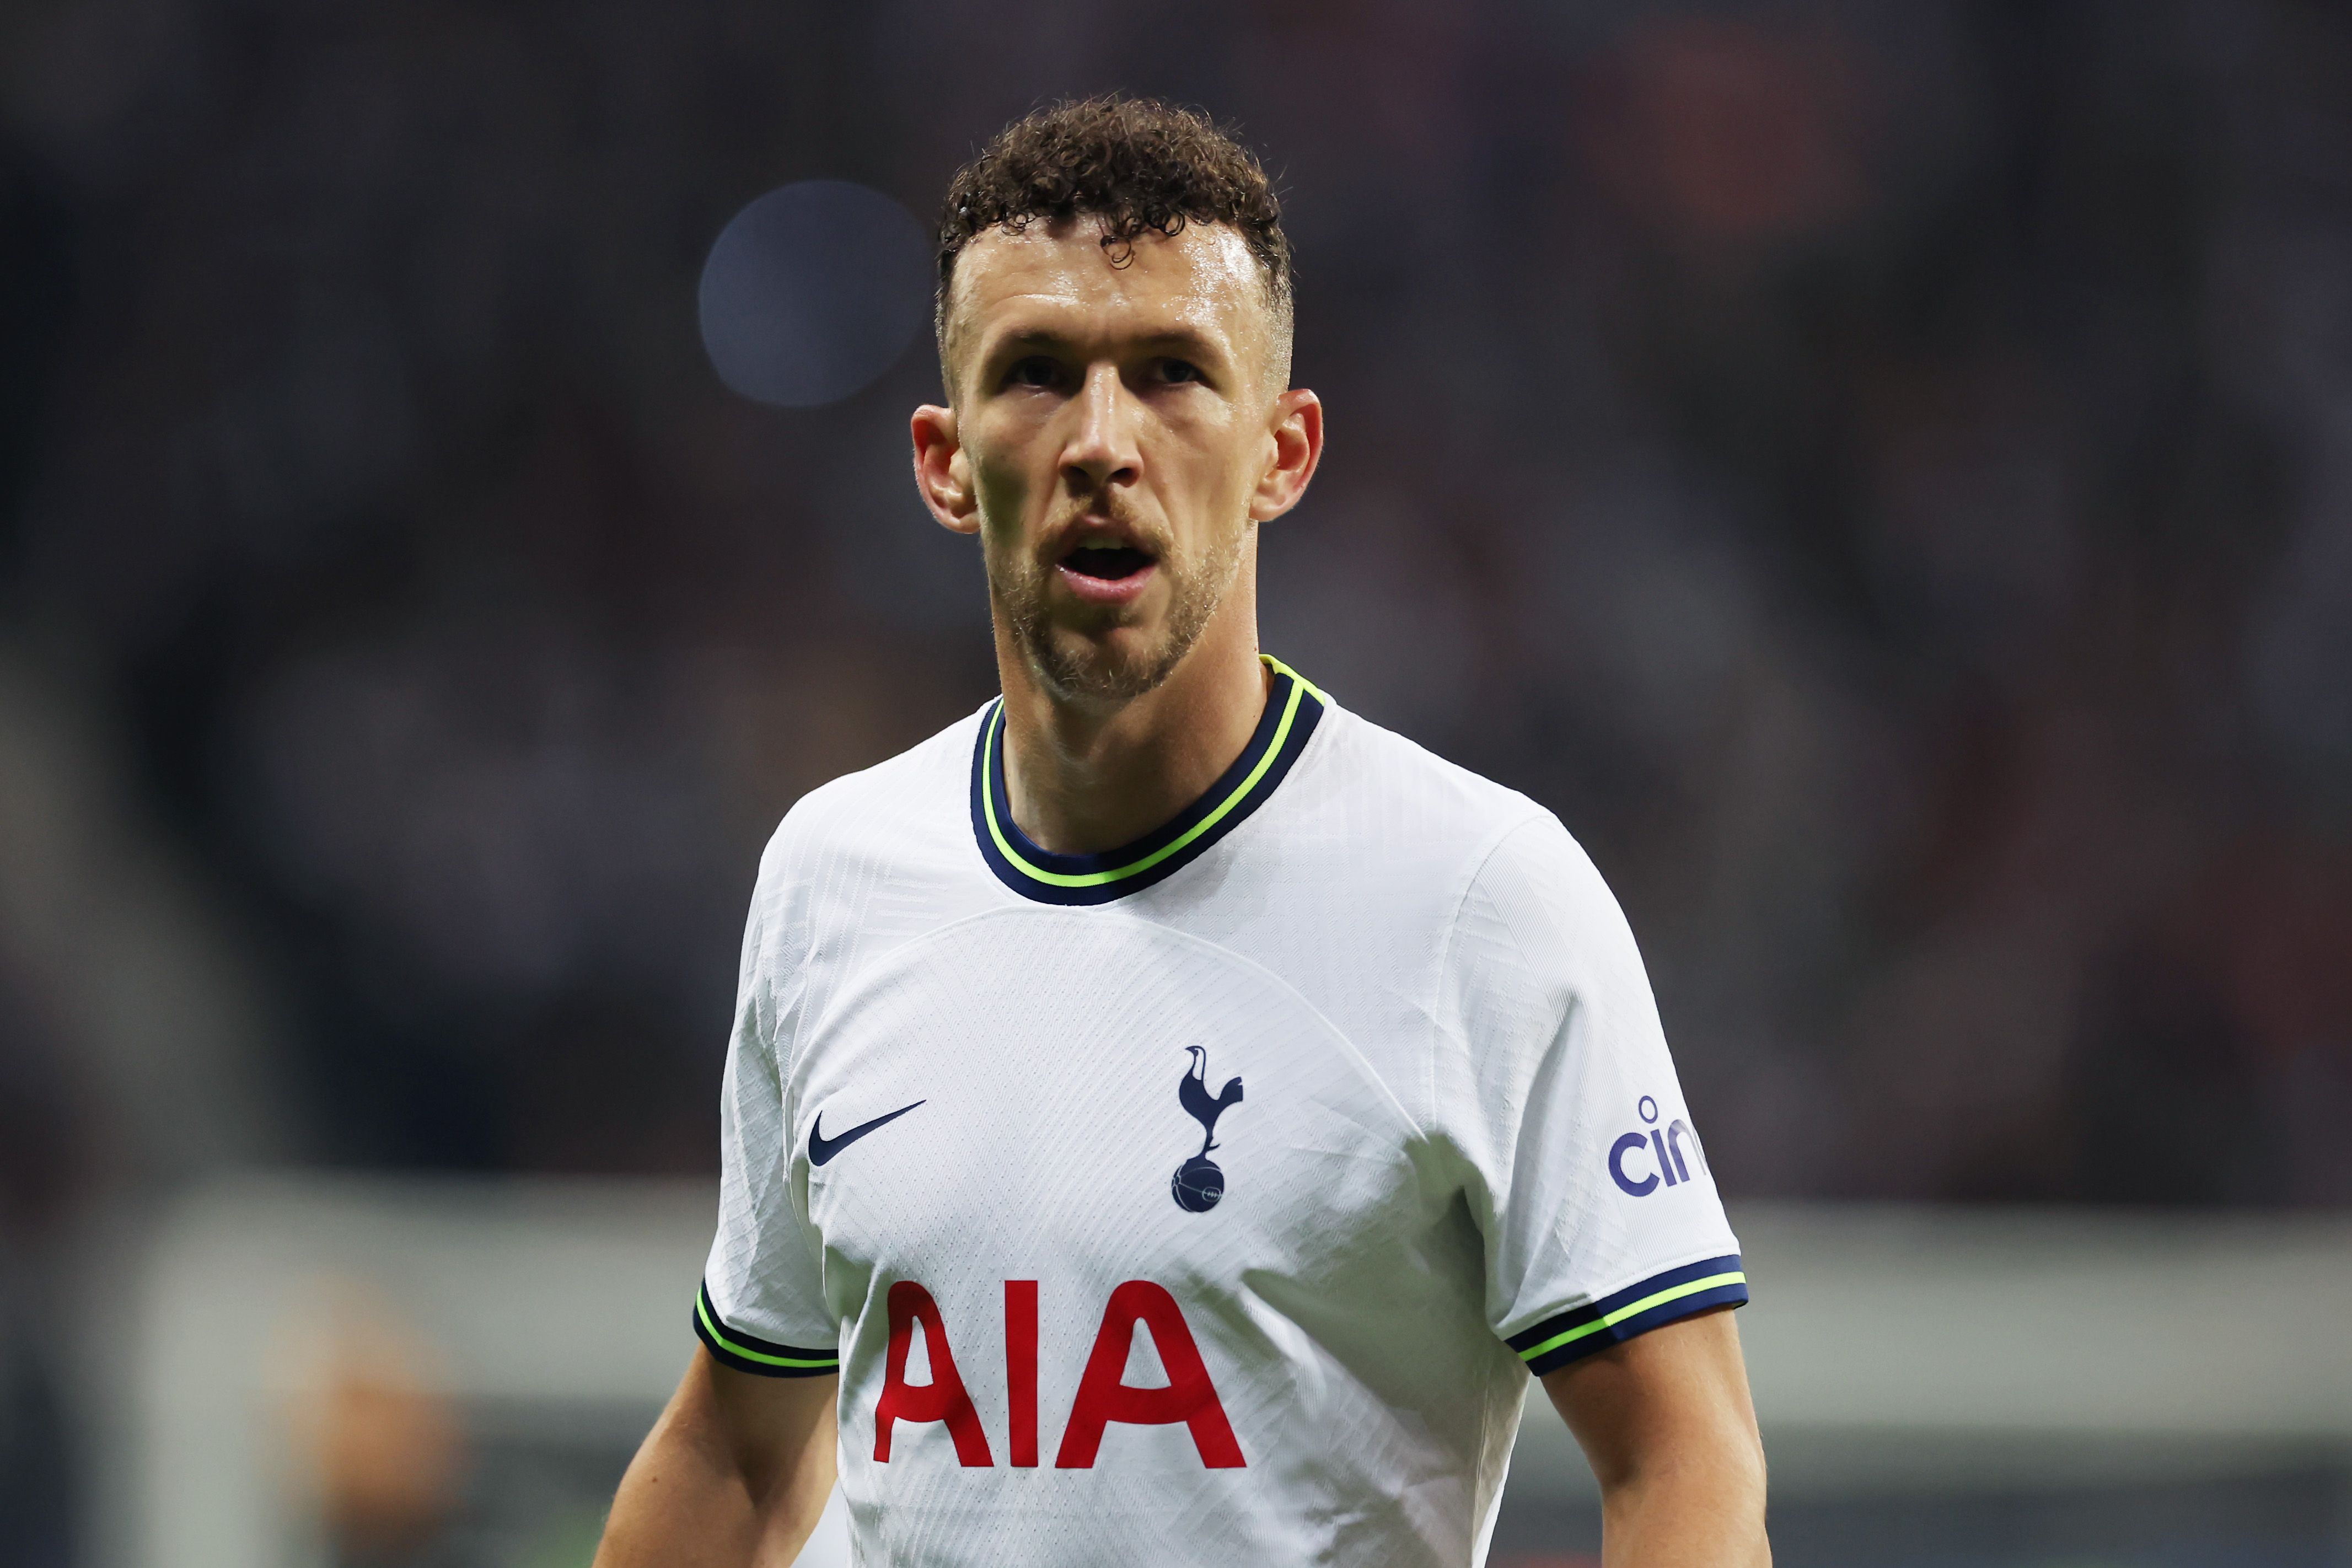 Ivan Perisic of Tottenham Hotspur reacts during the UEFA Champions League group D match 